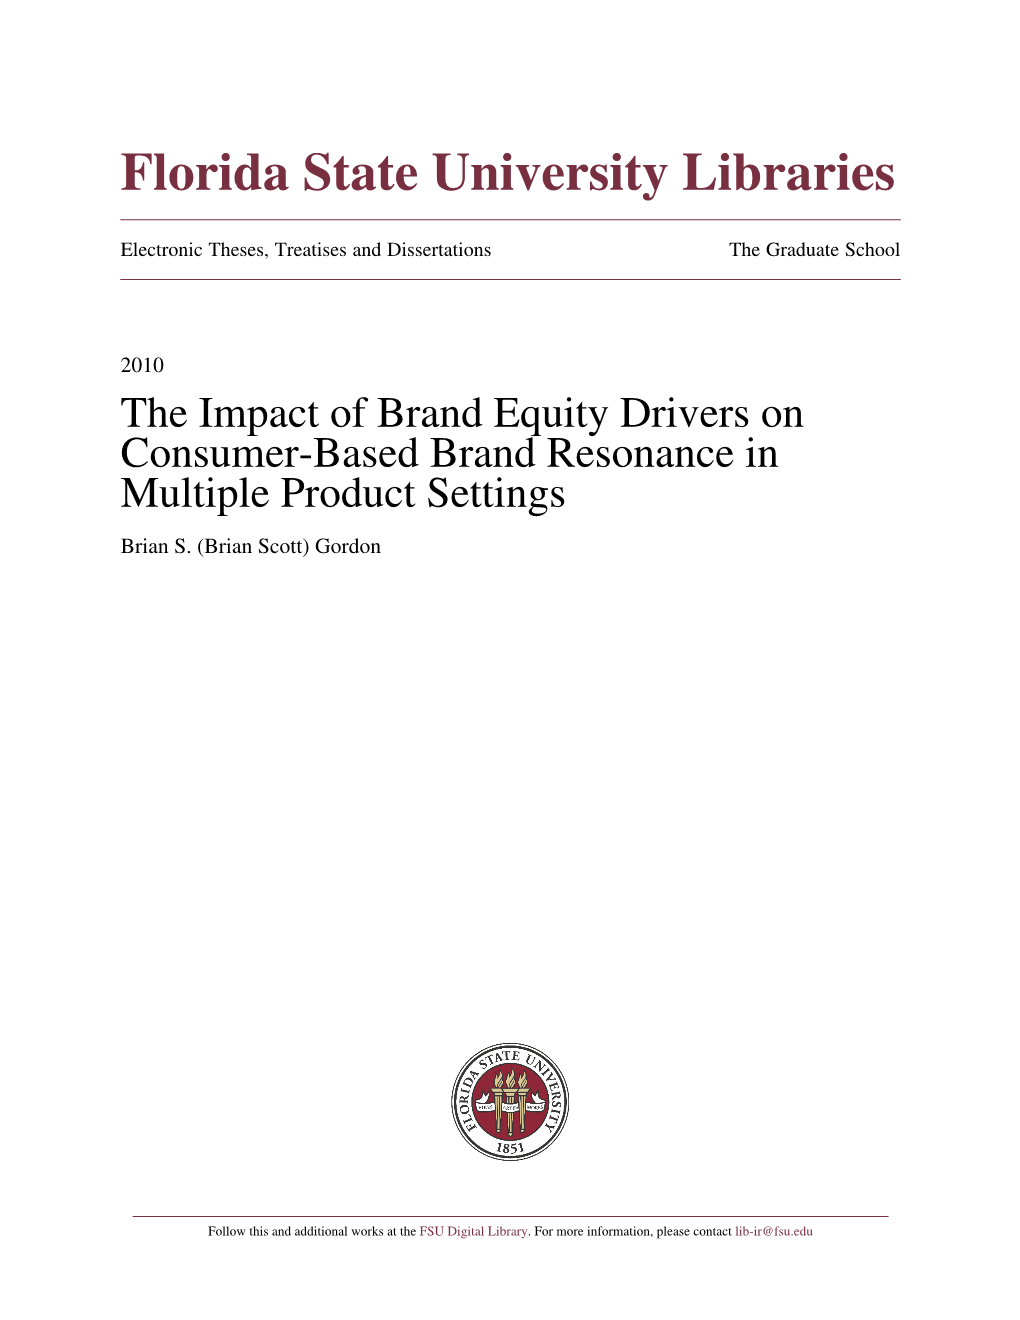 The Impact of Brand Equity Drivers on Consumer-Based Brand Resonance in Multiple Product Settings Brian S